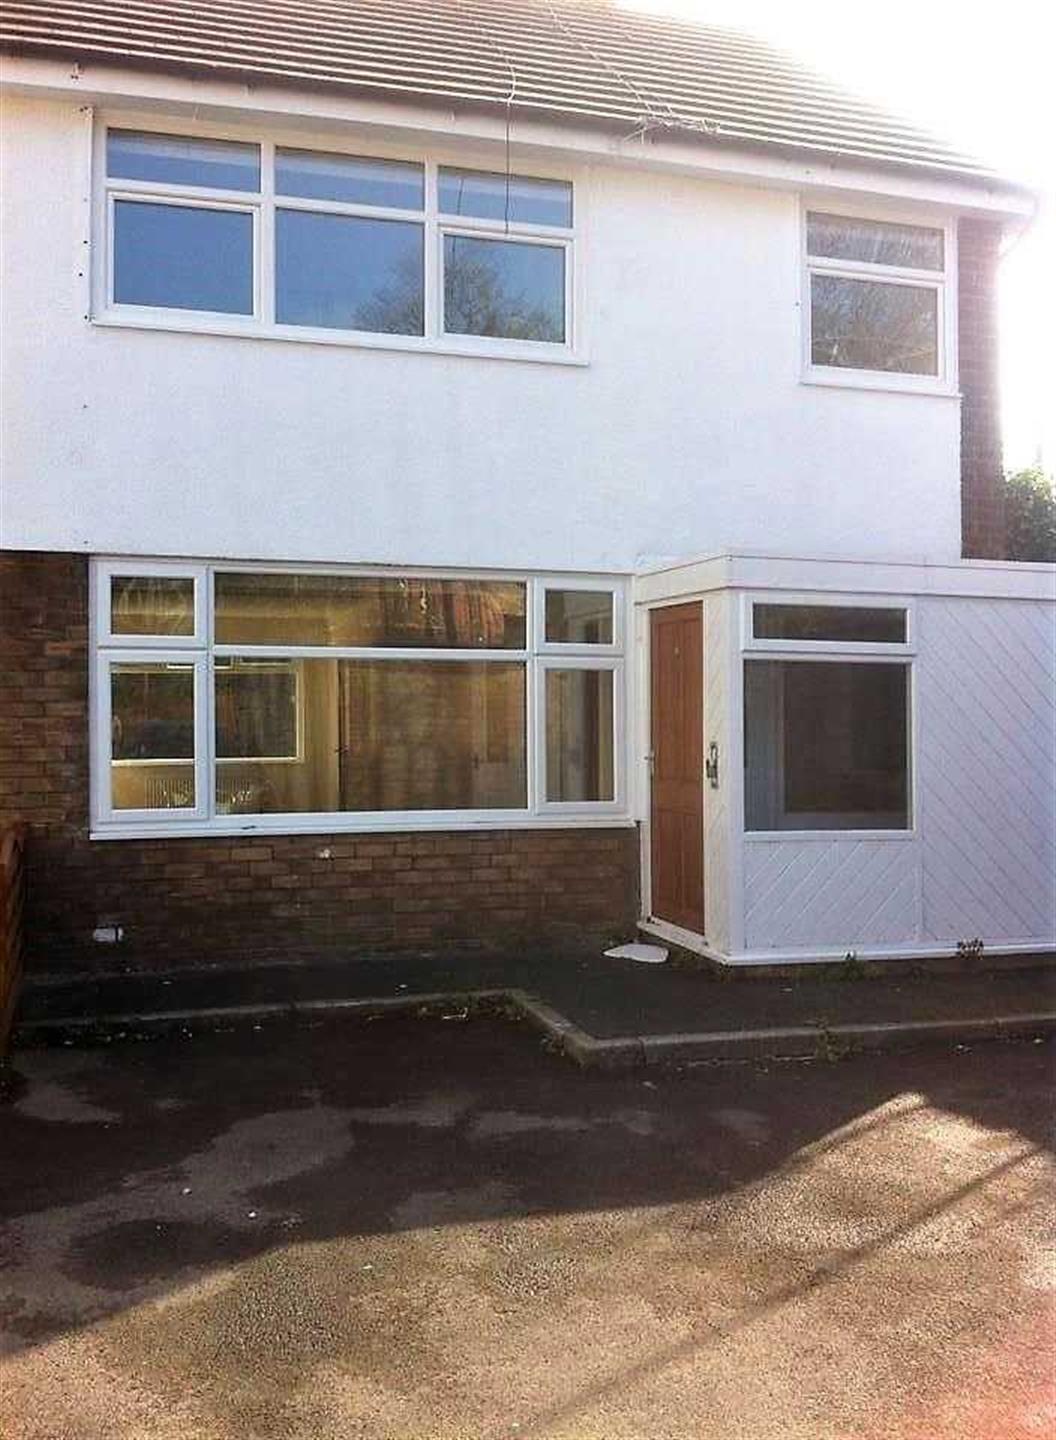 3 Bedroom Semi-detached House To Rent - Main Picture